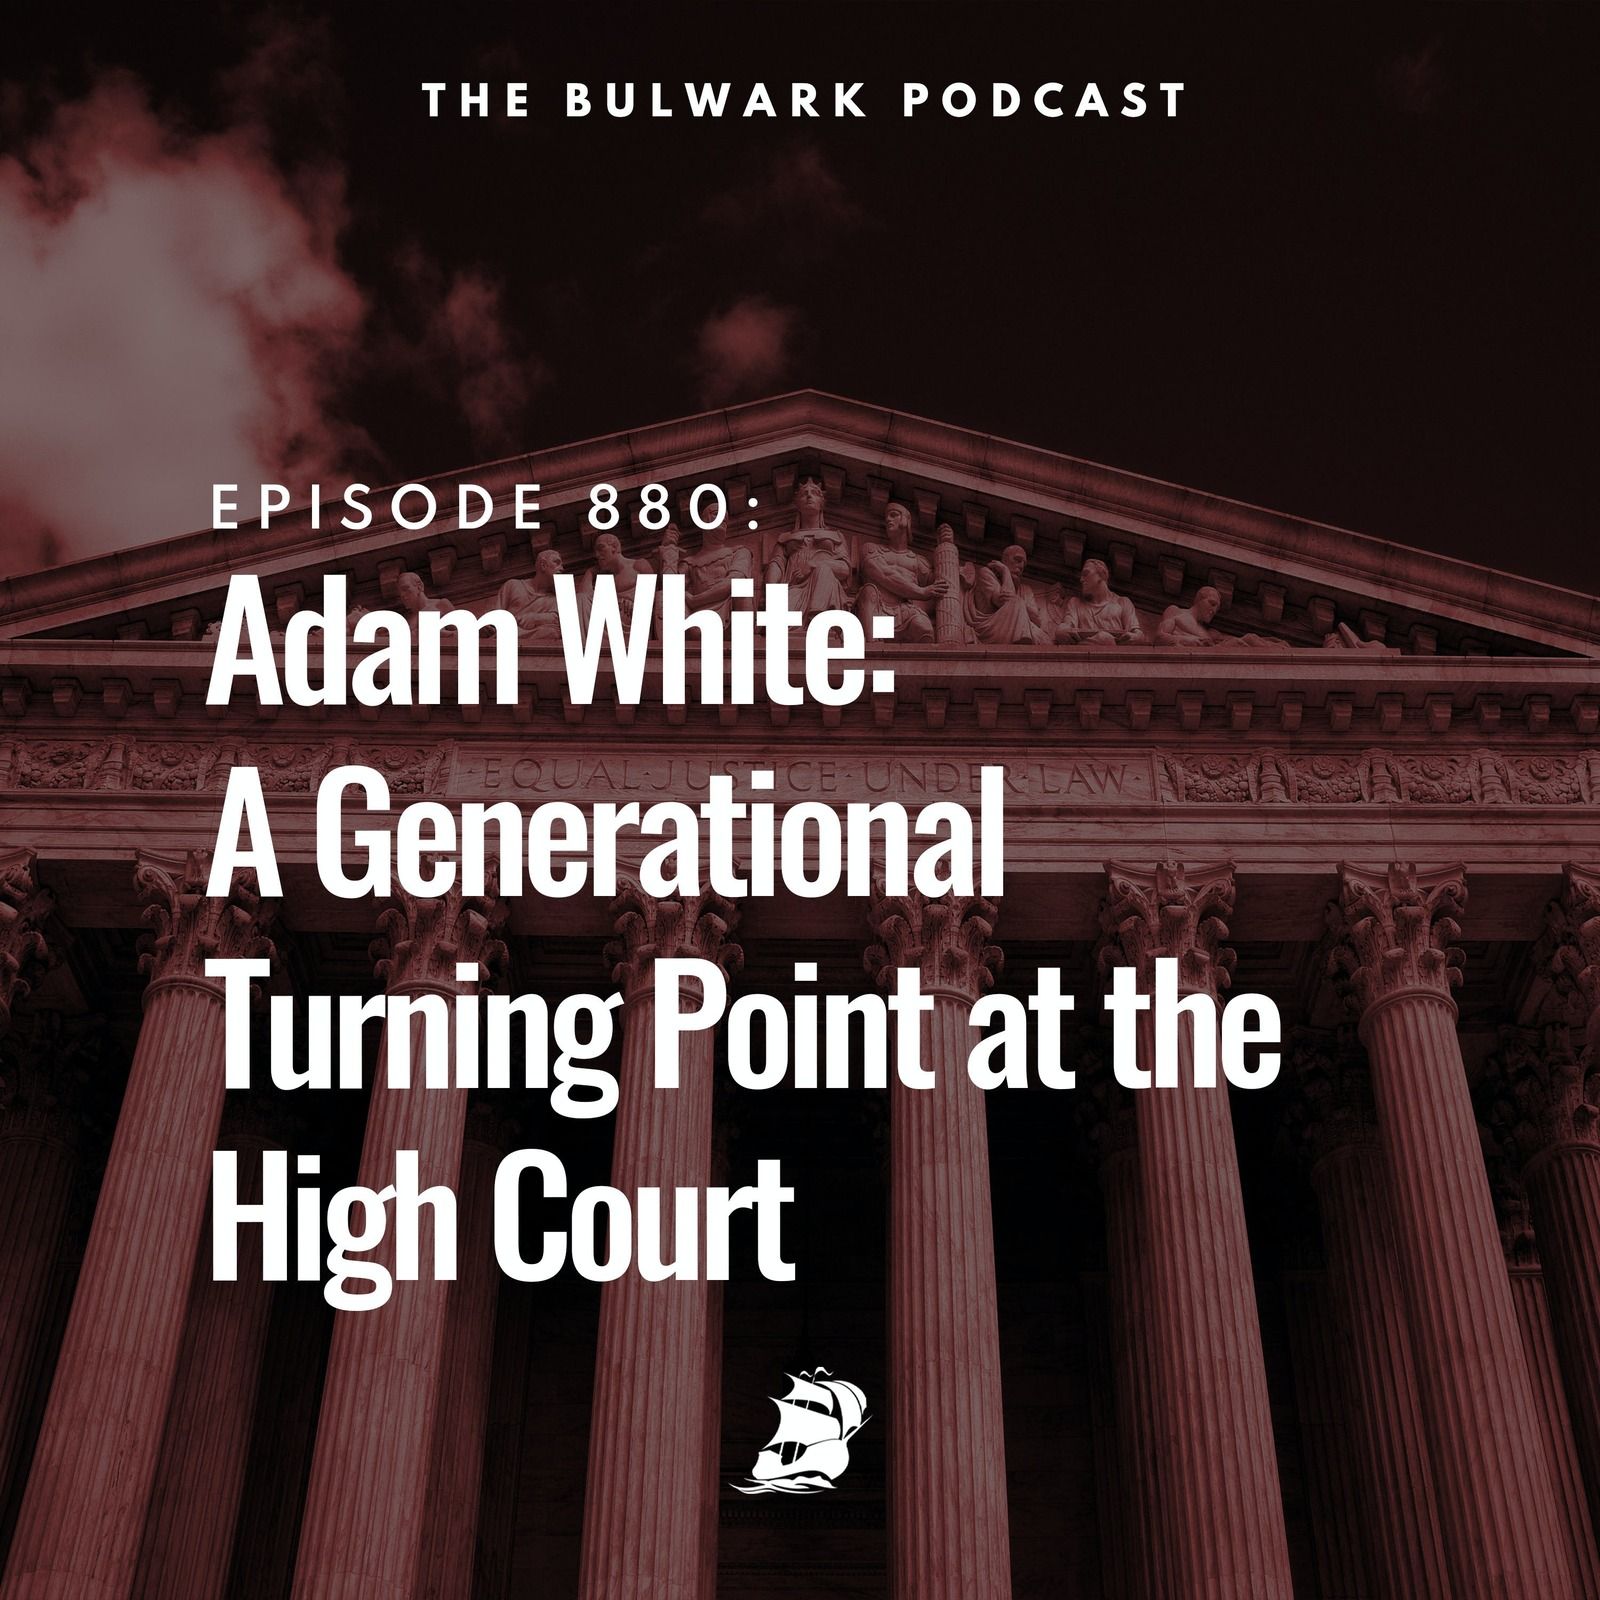 Adam White: A Generational Turning Point at the High Court